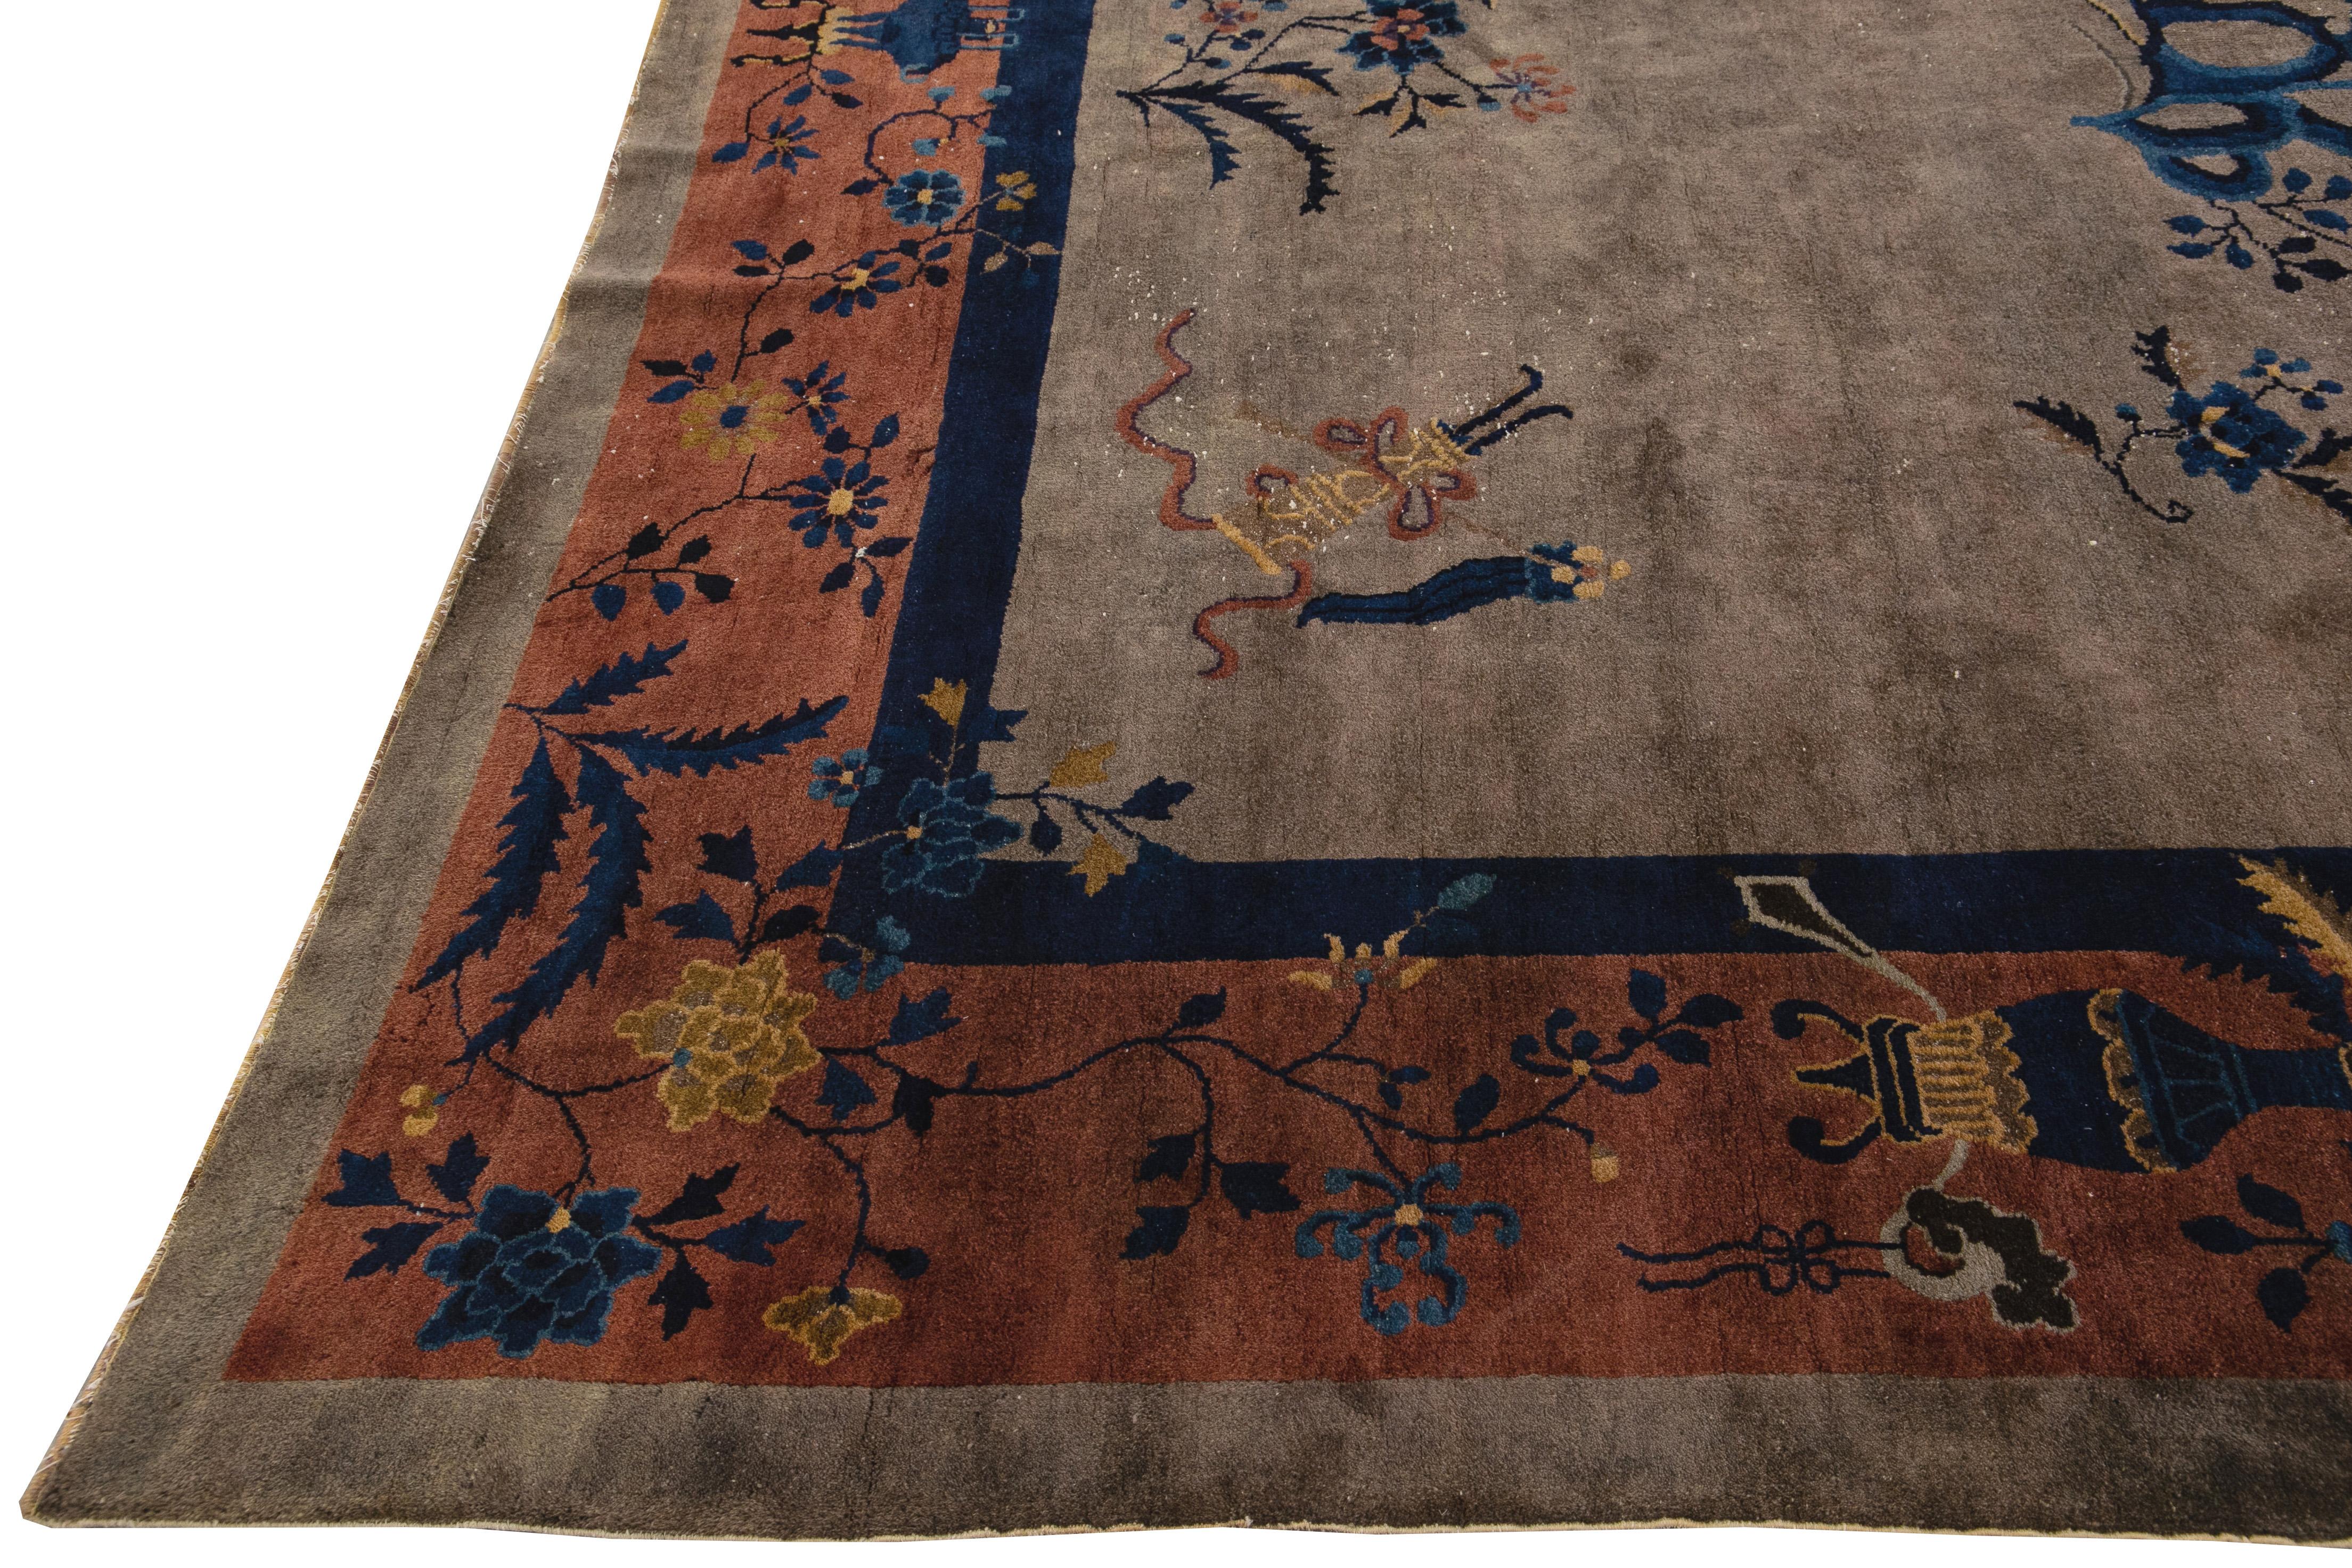 Antique Art Deco Handmade Floral Chinese Motif Wool Rug In Excellent Condition For Sale In Norwalk, CT